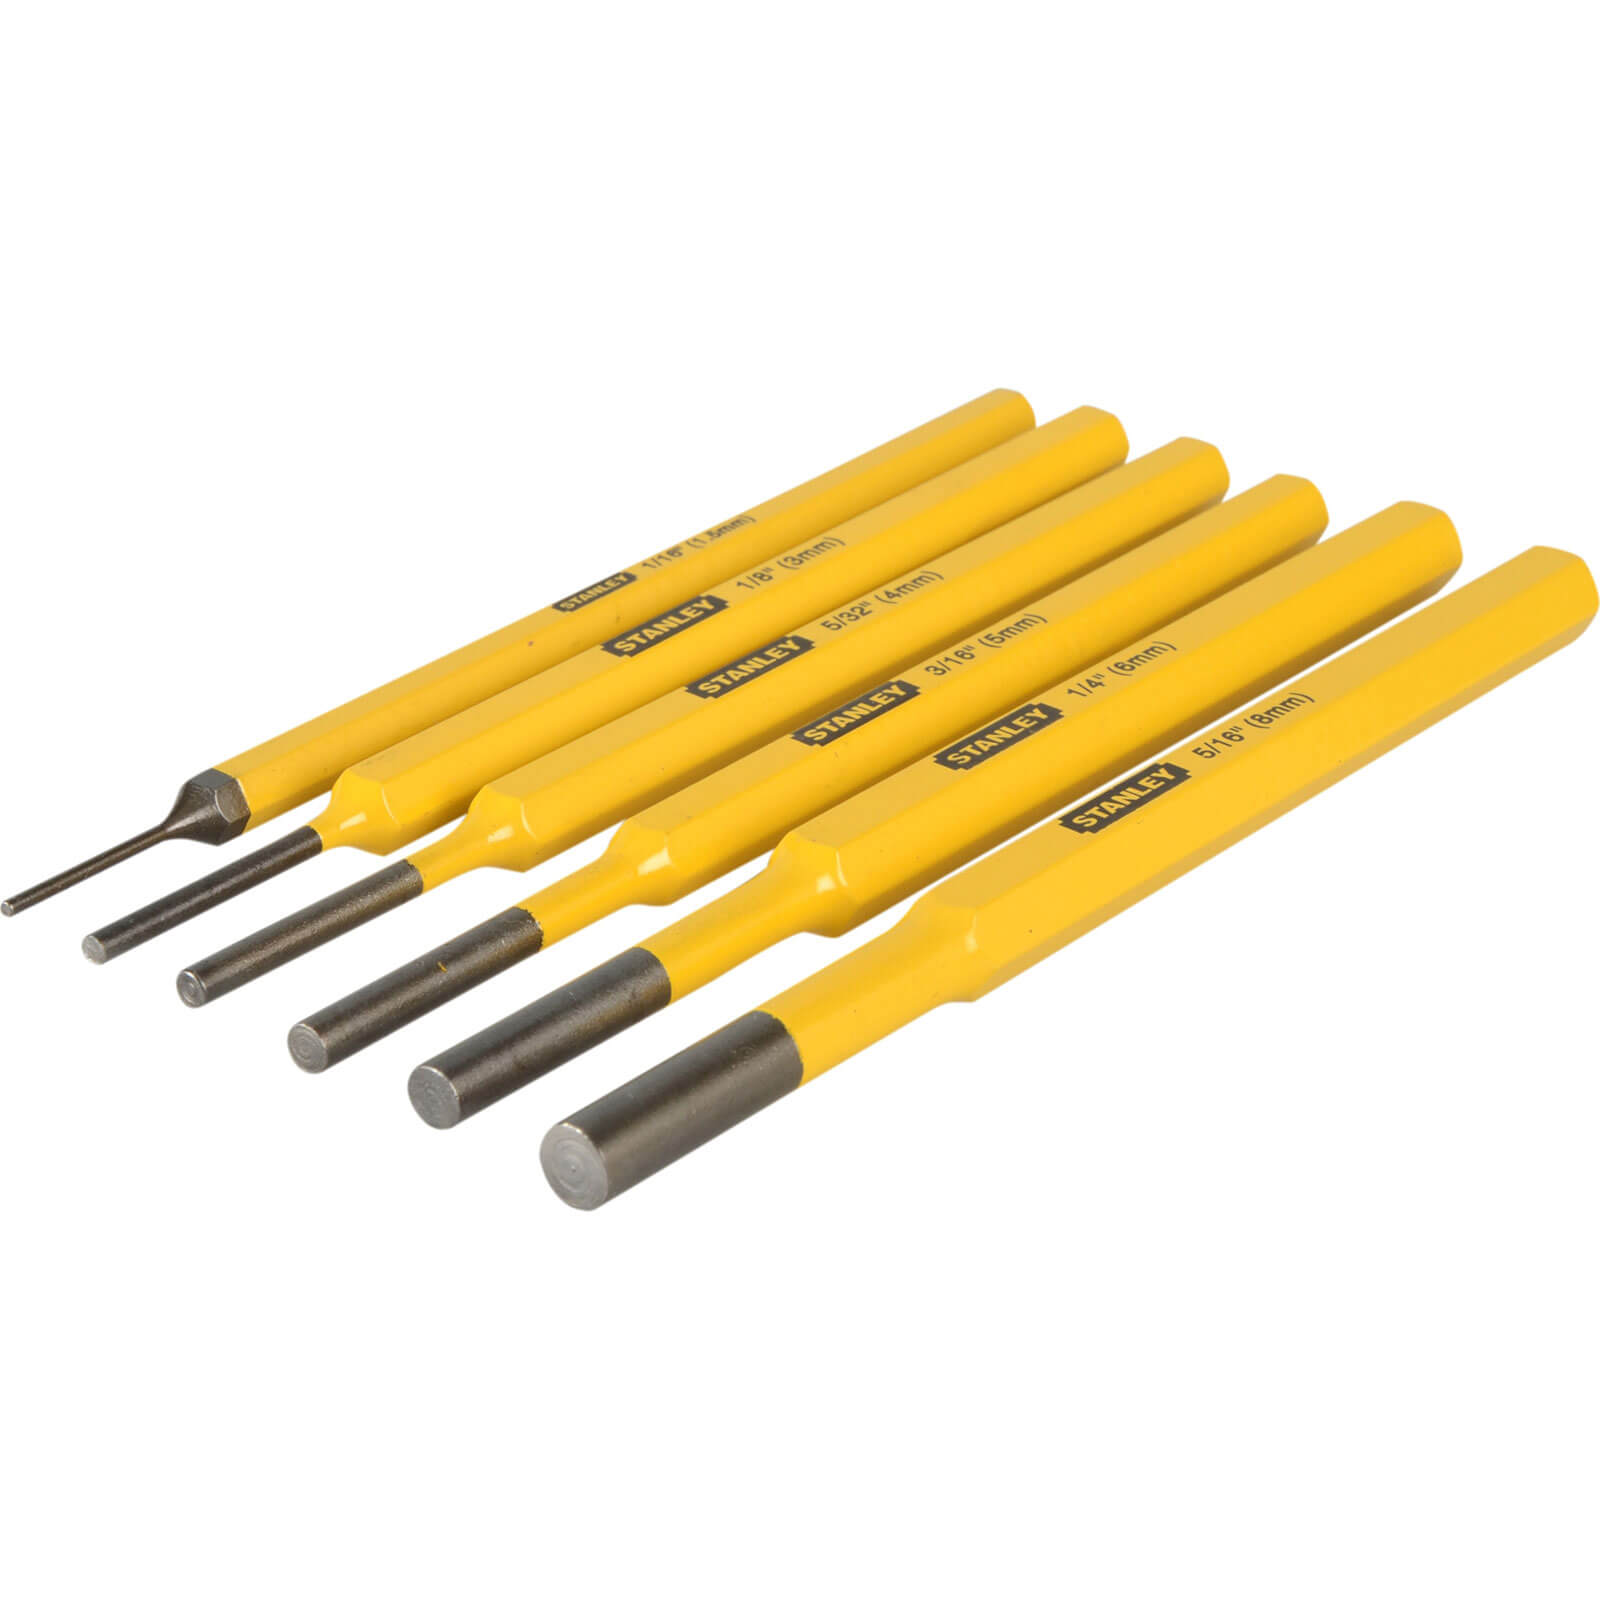 Photo of Stanley 6 Piece Punch Set